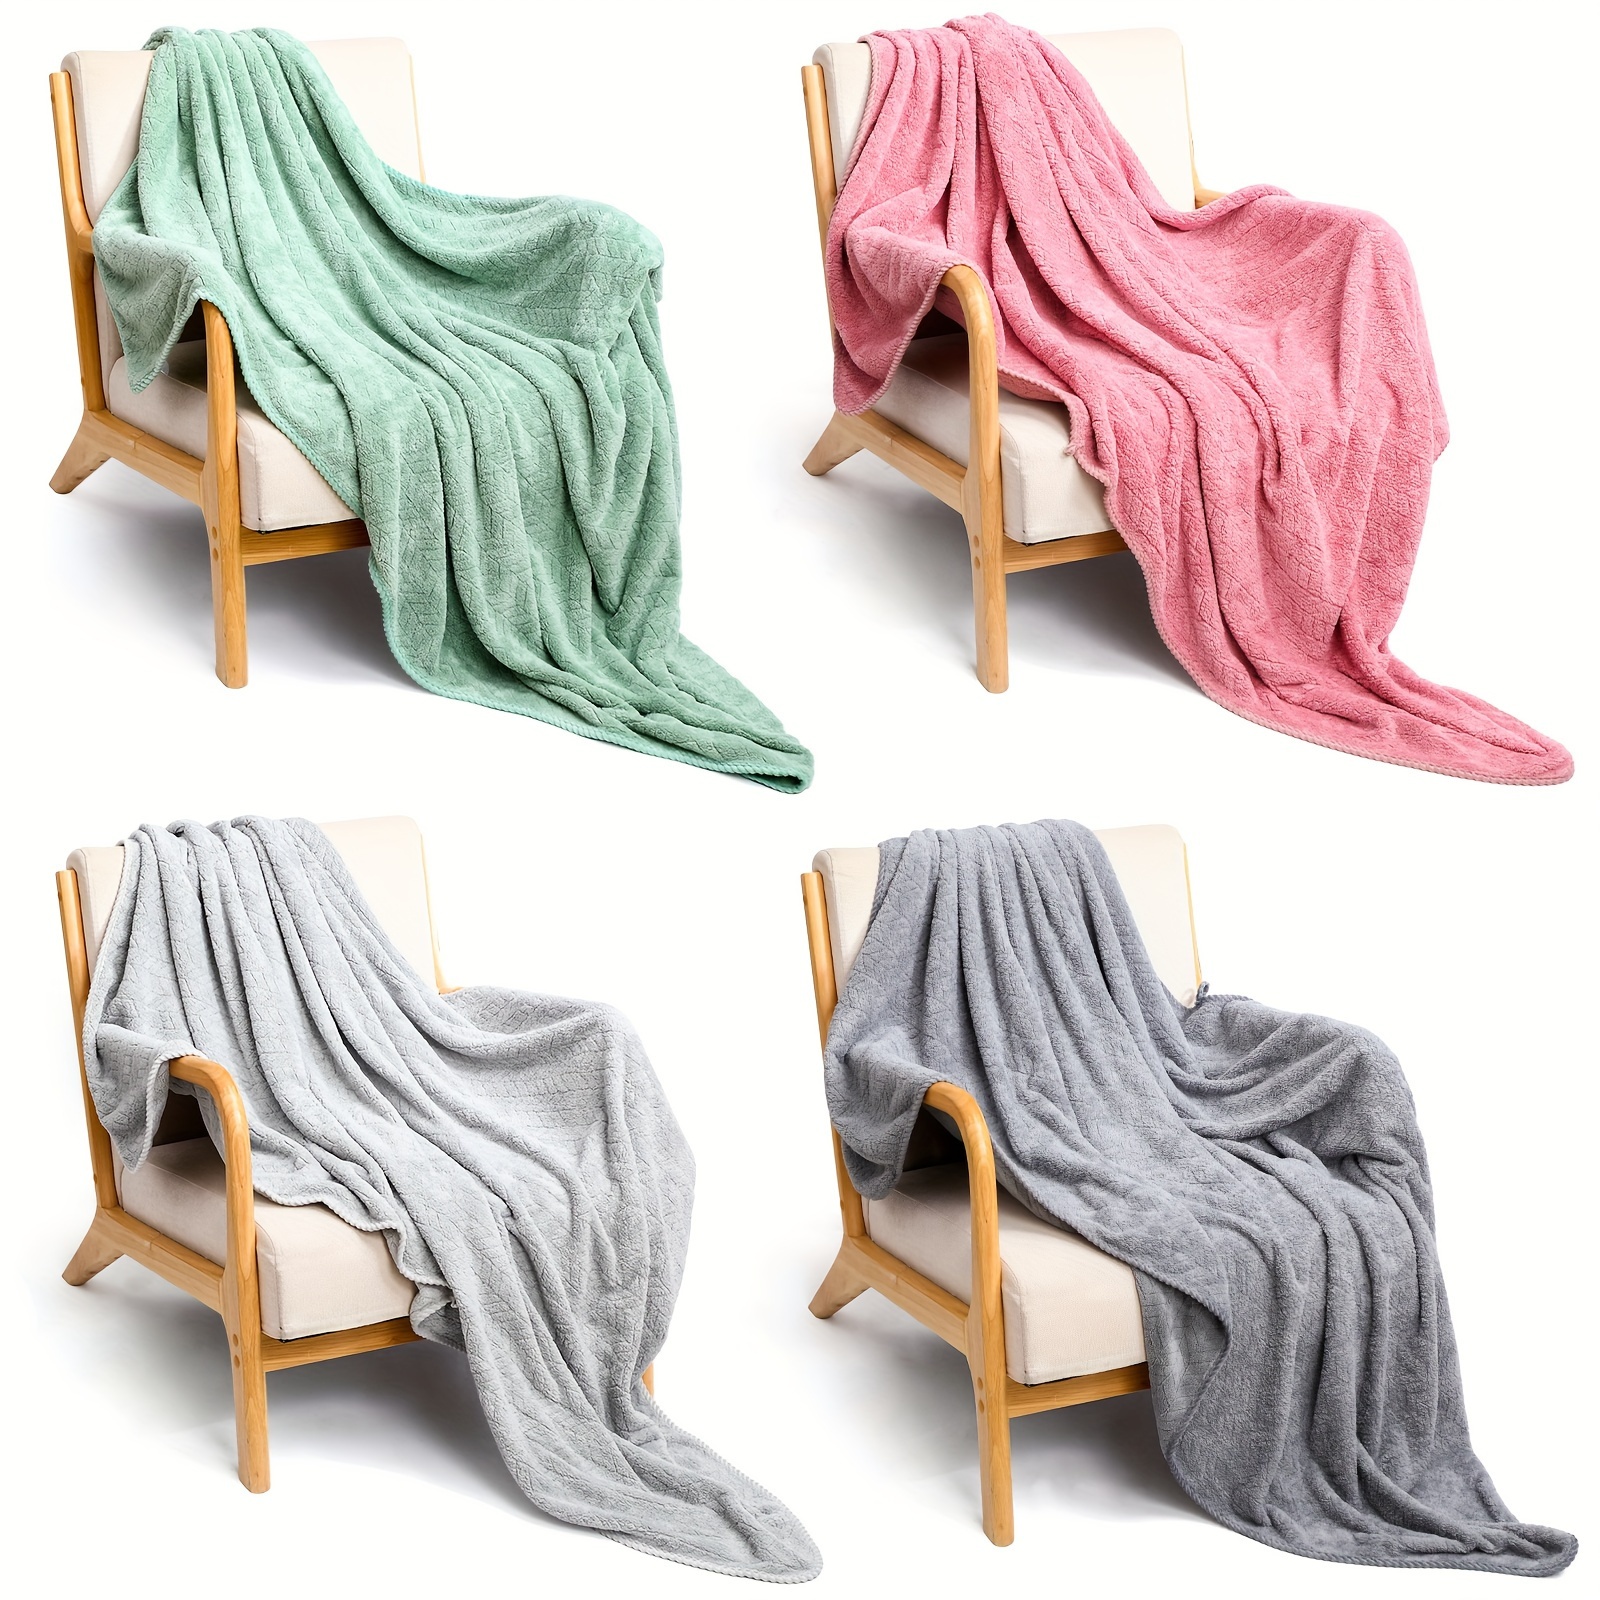 

4 Pieces Extra Large Flannel Fleece Throw Blanket 50 X 70 Inches Soft Warm Bed Blanket Leaves Pattern Plush Lightweight Blanket For Winter Couch Sofa Home Travel Most Season Use, 4 Colors